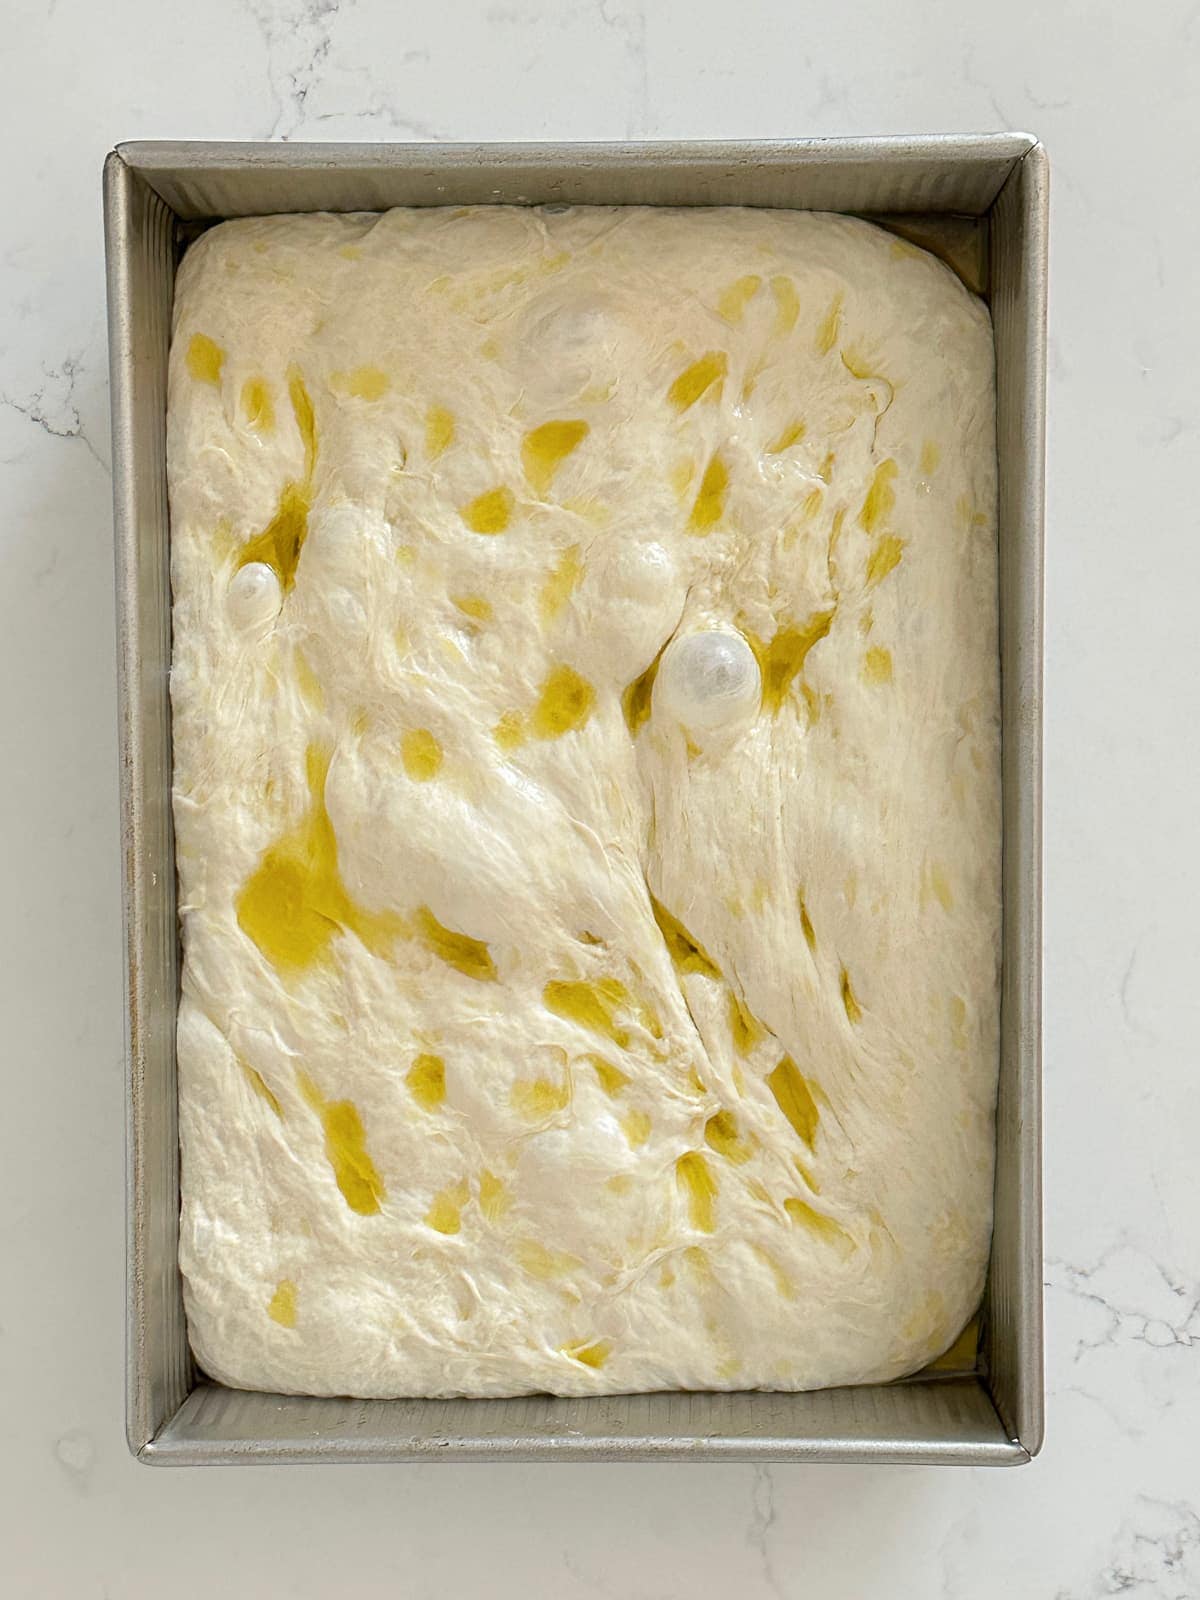 focaccia dough in a 9x13 baking pan after it has been resting at room temperature for several hours to develop the large bubbles that focaccia is known for.